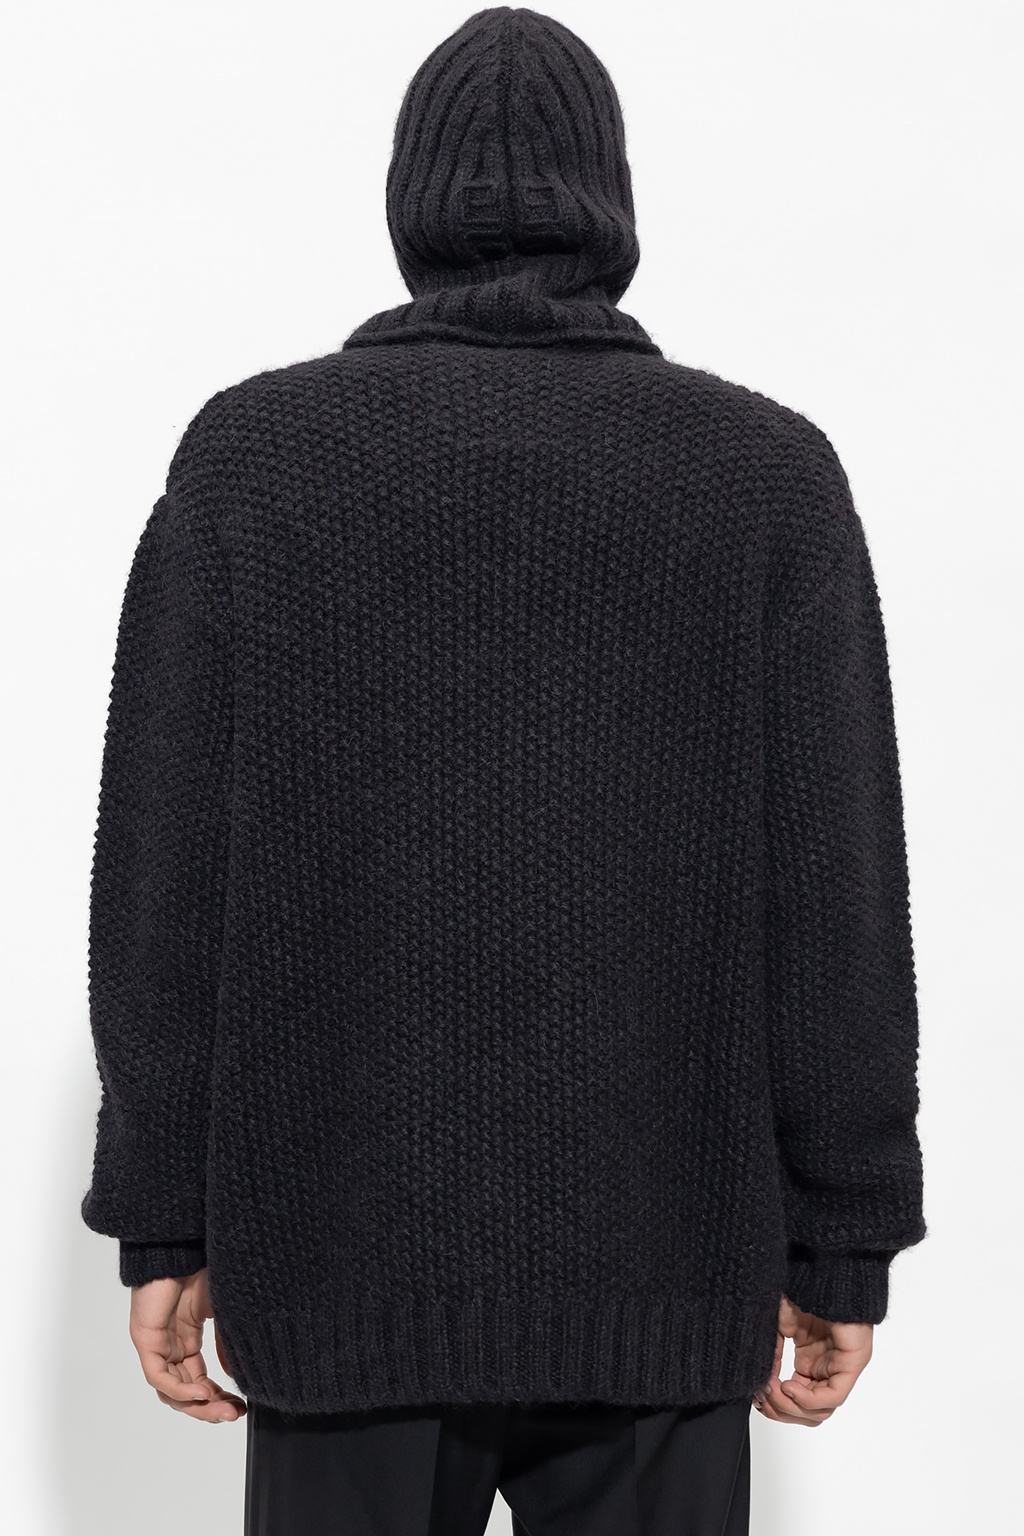 givenchy sweater Sweater with balaclava